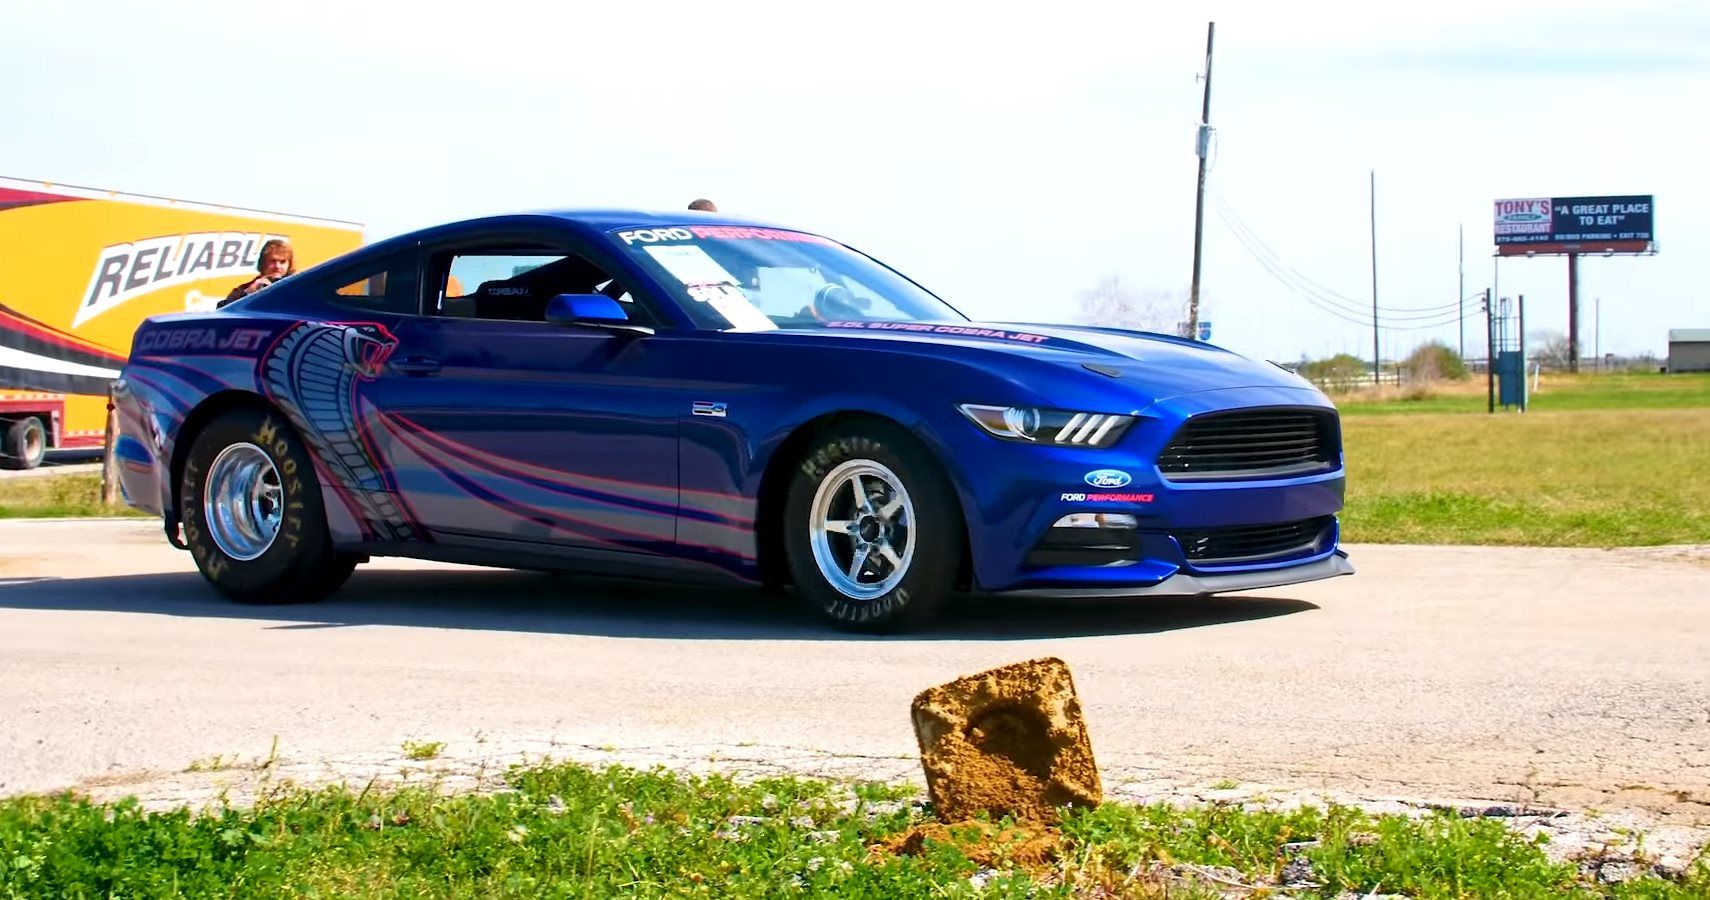 Watch Hennessey Dyno Test A Mustang Cobra Jet With Insane Power